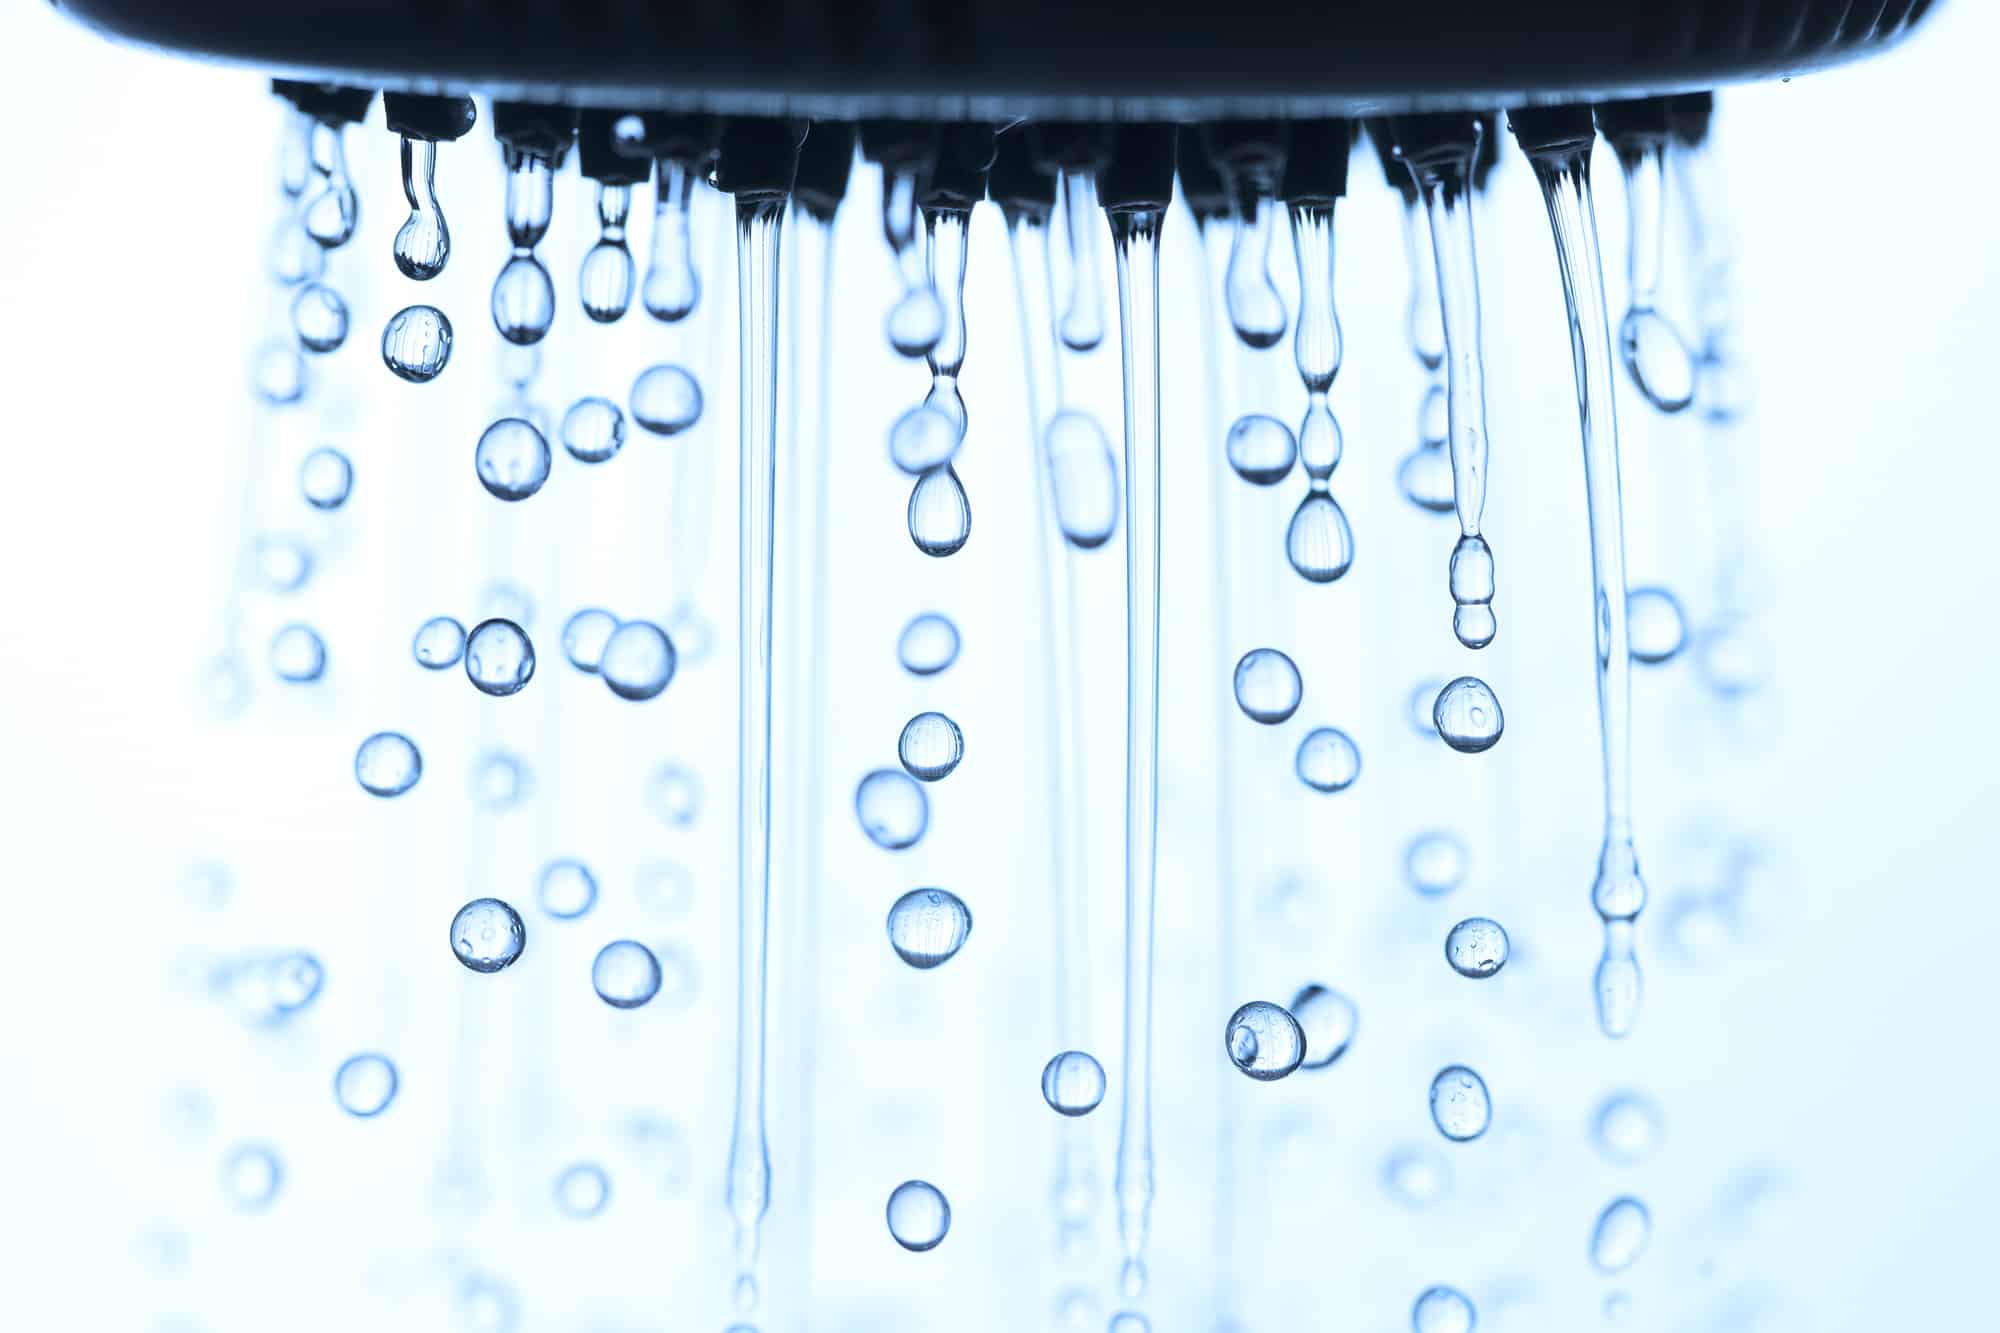 Shower head and water drops